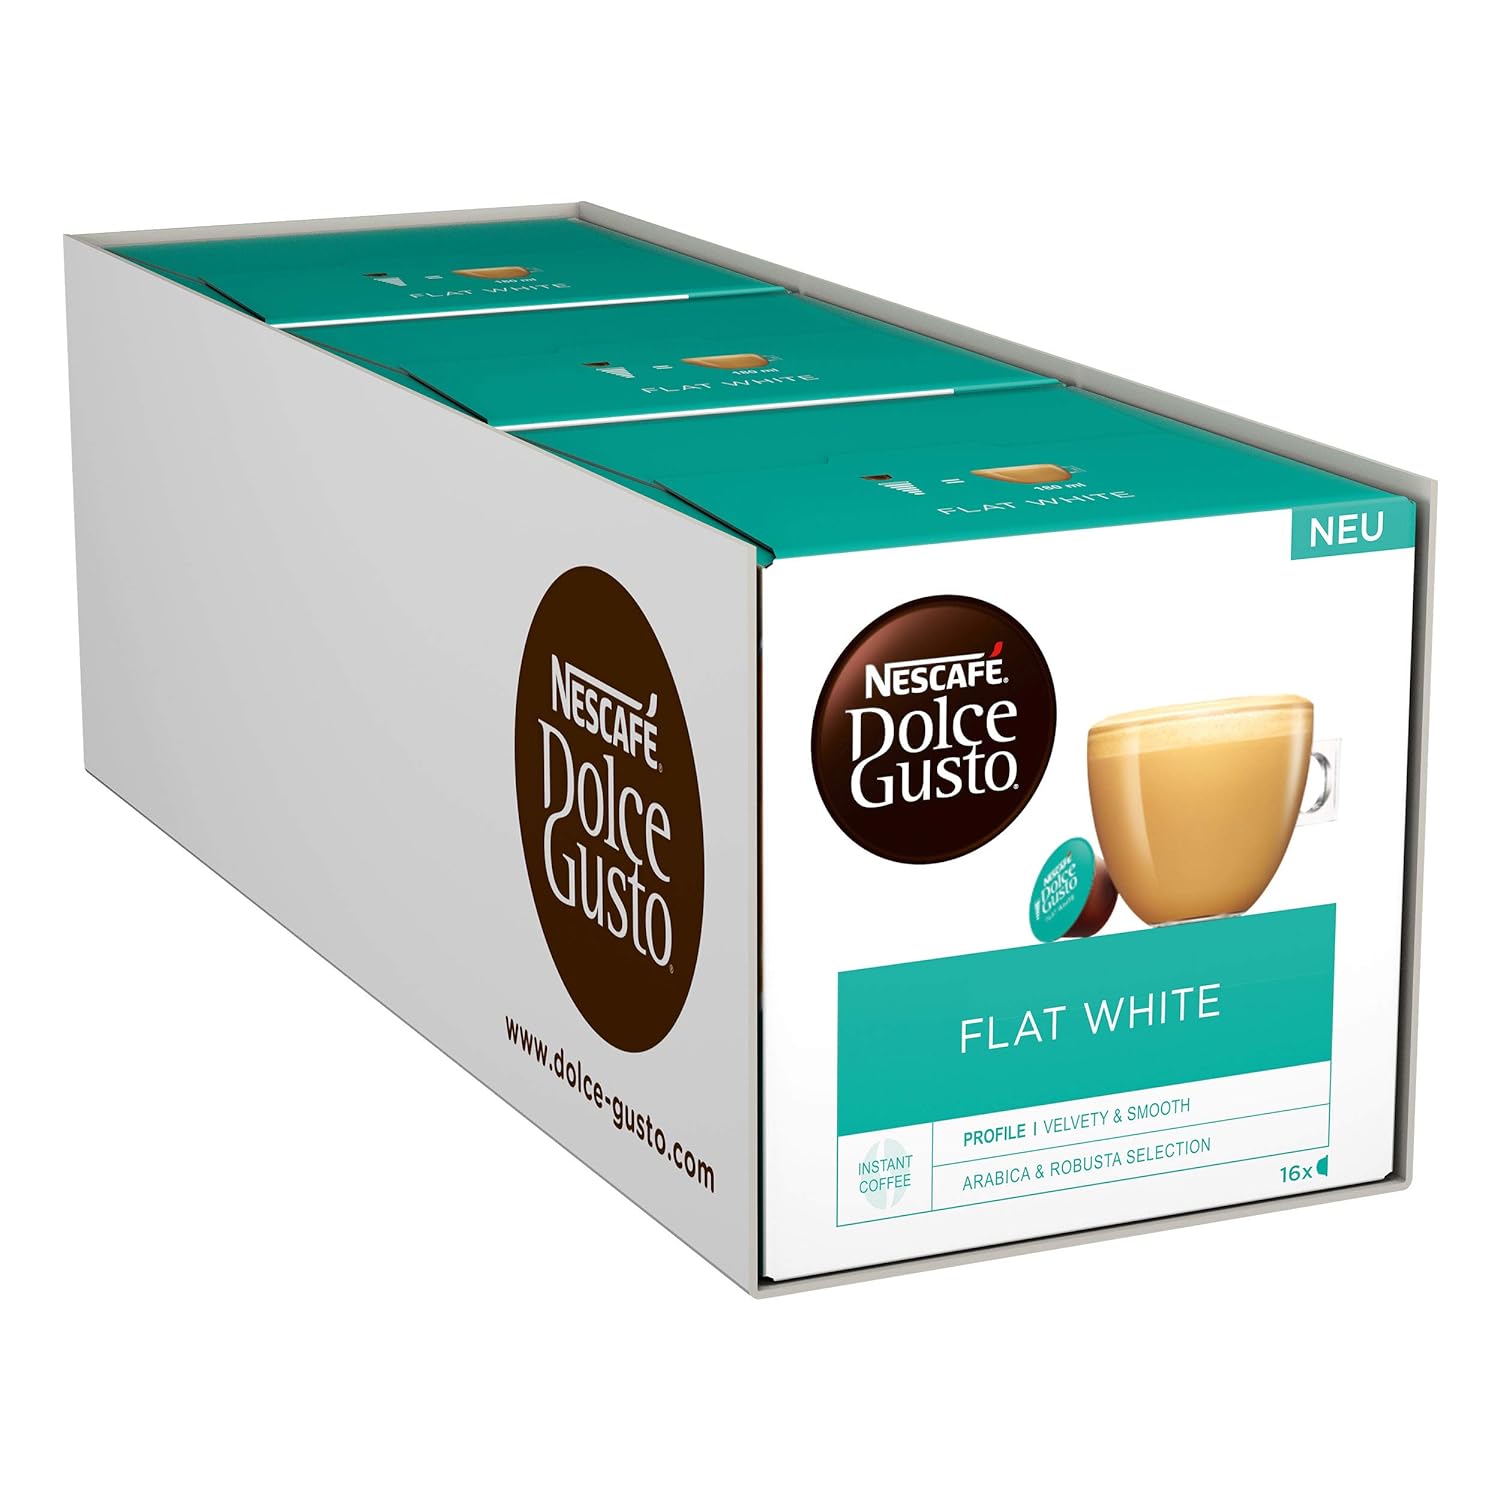 NESCAFÉ Dolce Gusto Flat White | 48 coffee capsules | Arabica and Robusta beans | Creamy-Milky Enjoyment | Coffee creation | Coffee shop trend | Aroma-sealed capsules (3 x 16 capsules)